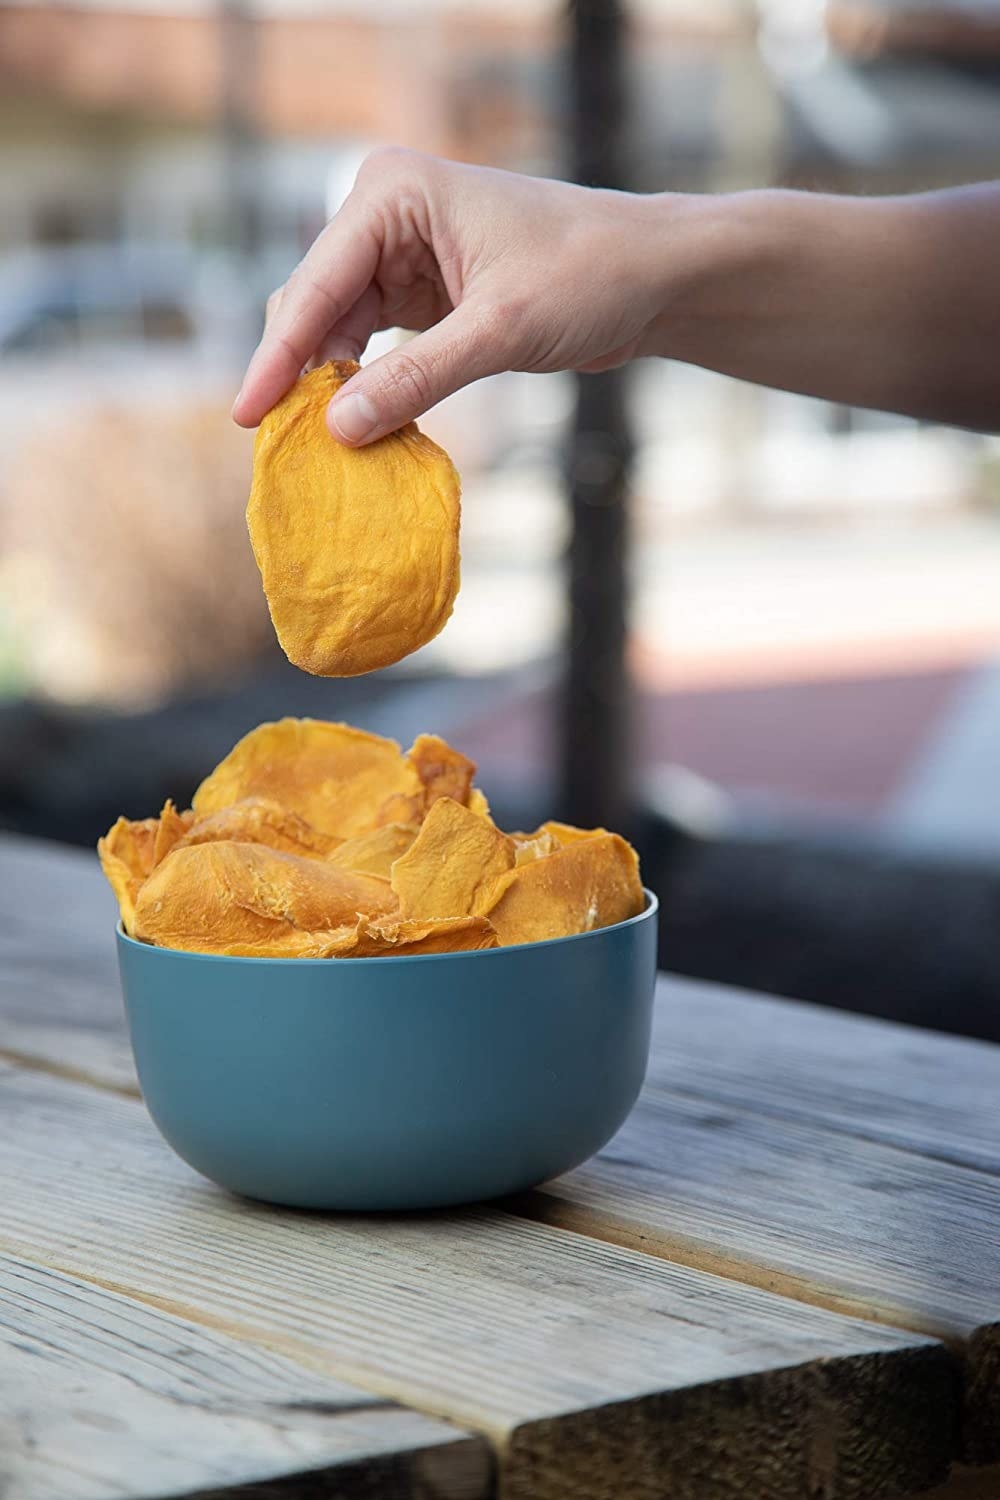 The dried mango in a blue bowl, with someone&#x27;s hand holding a single piece above the bowl to portray it&#x27;s size and texture